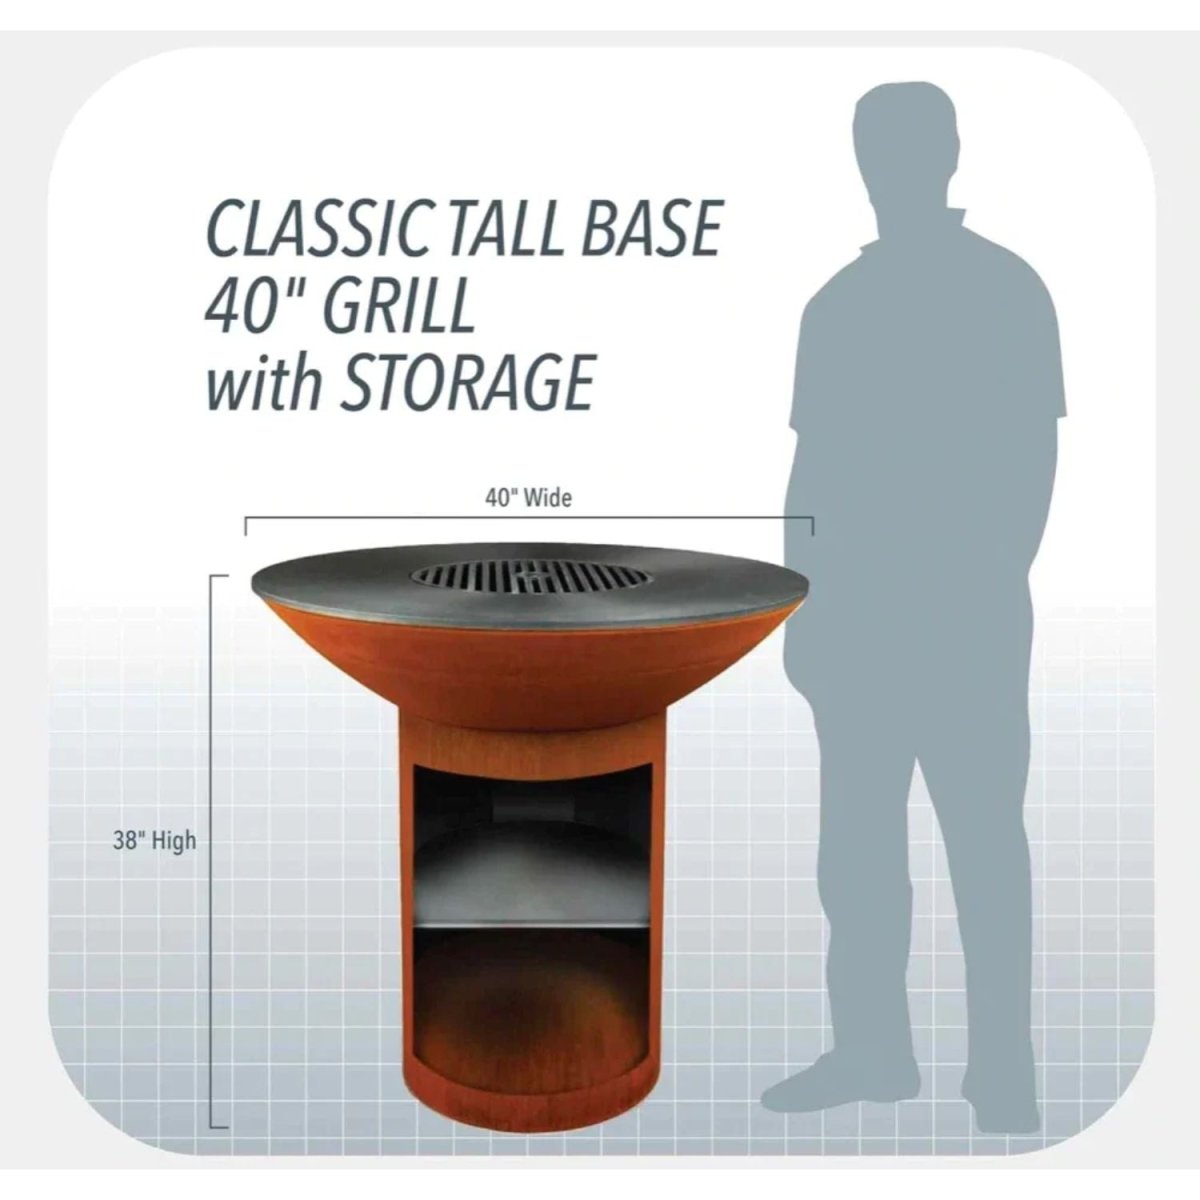 Arteflame Classic 40" Grill Black Label - Tall Round Base w/ Storage- Upper Livin